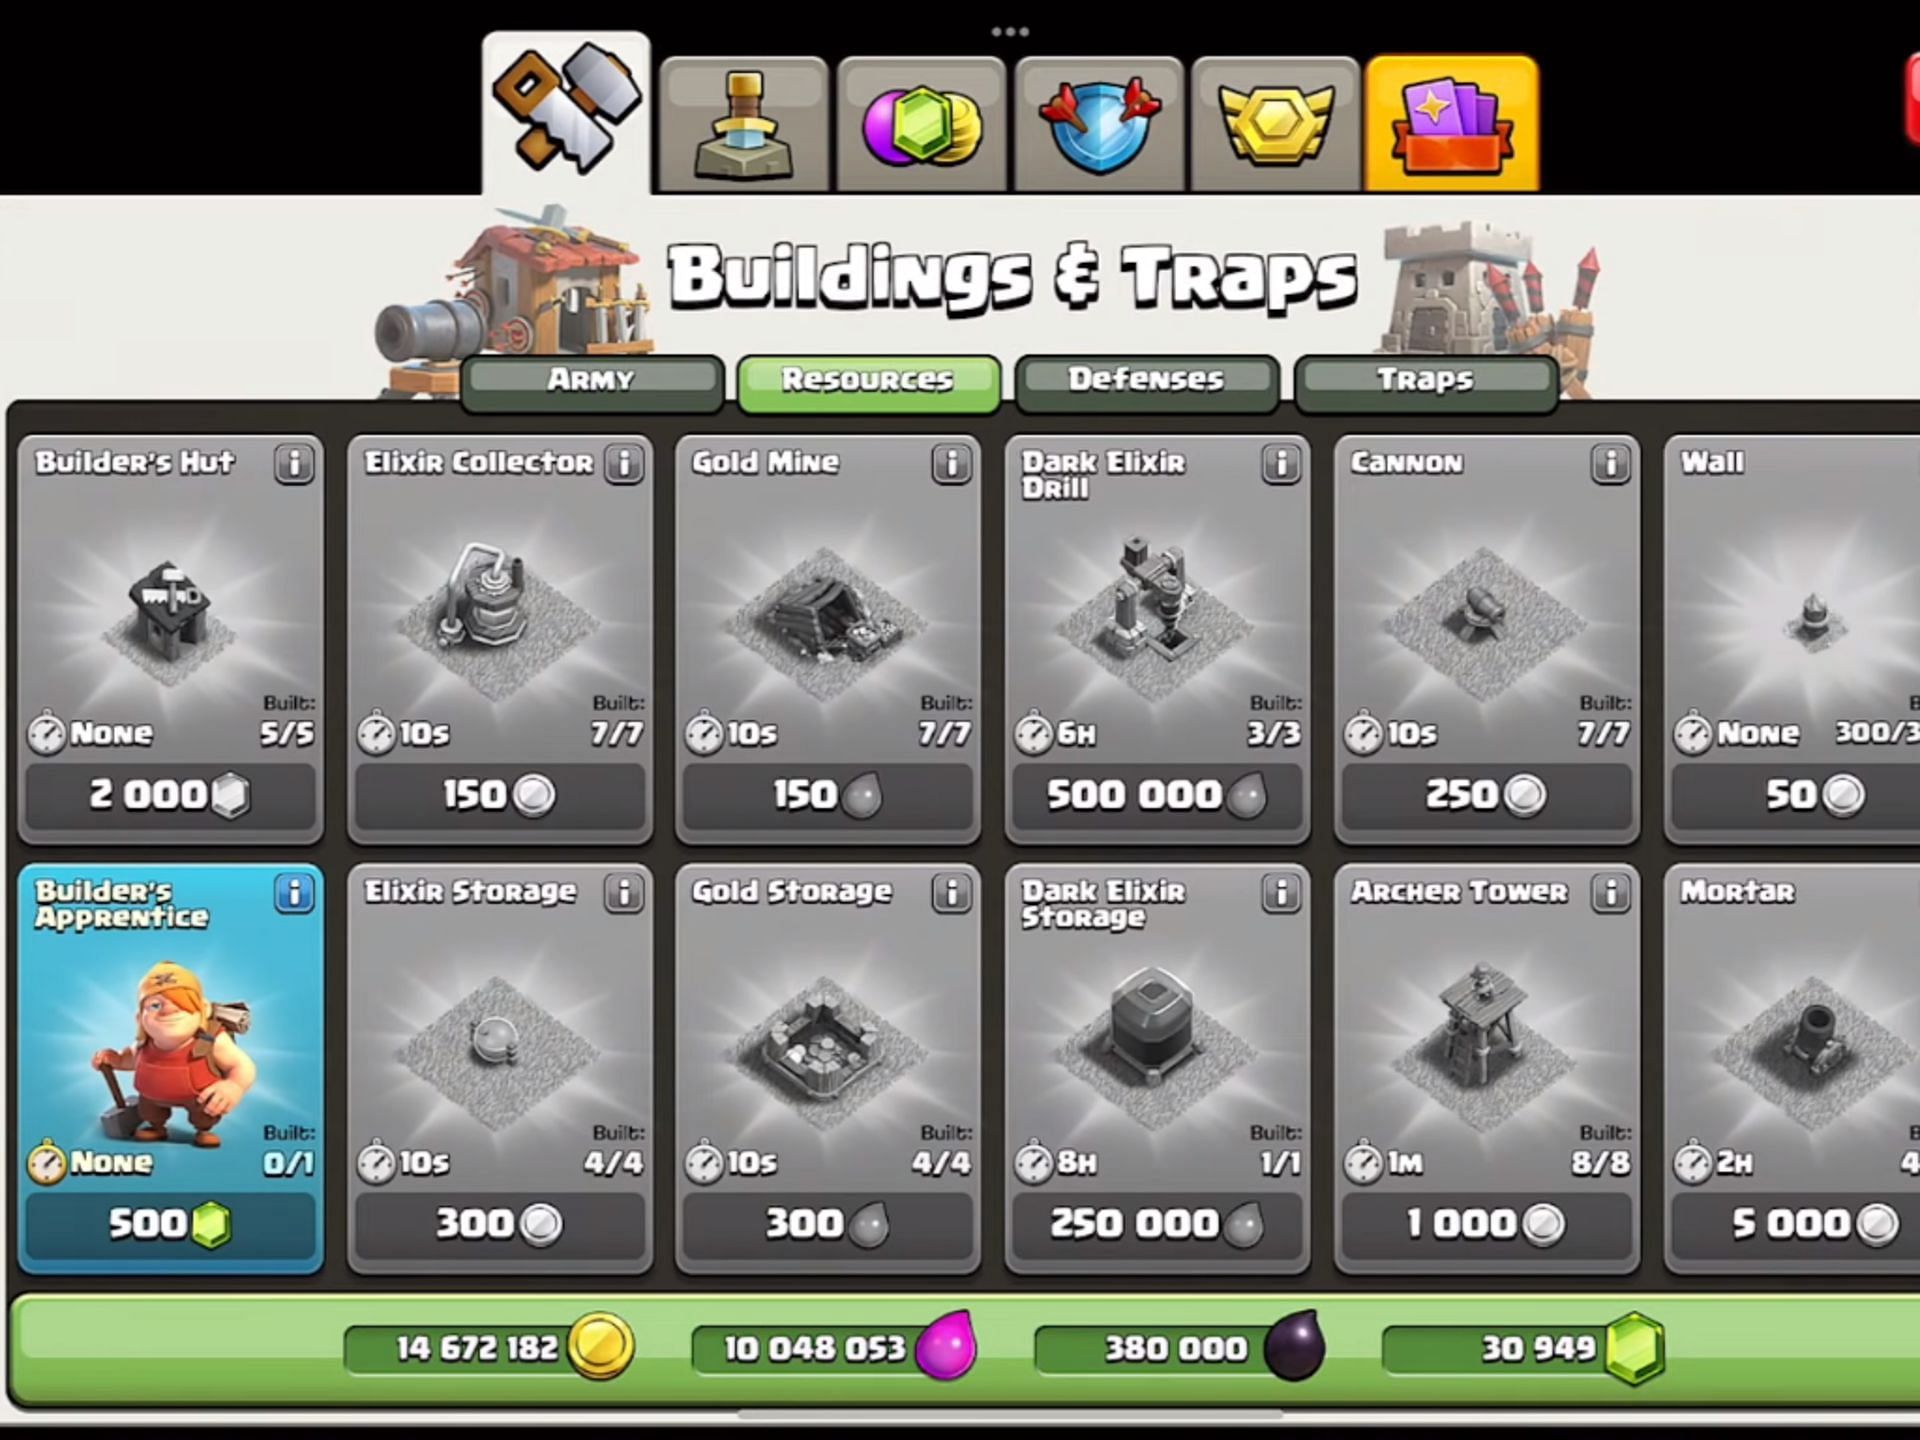 Builder&#039;s Apprentice available in the shop (Image via Supercell)